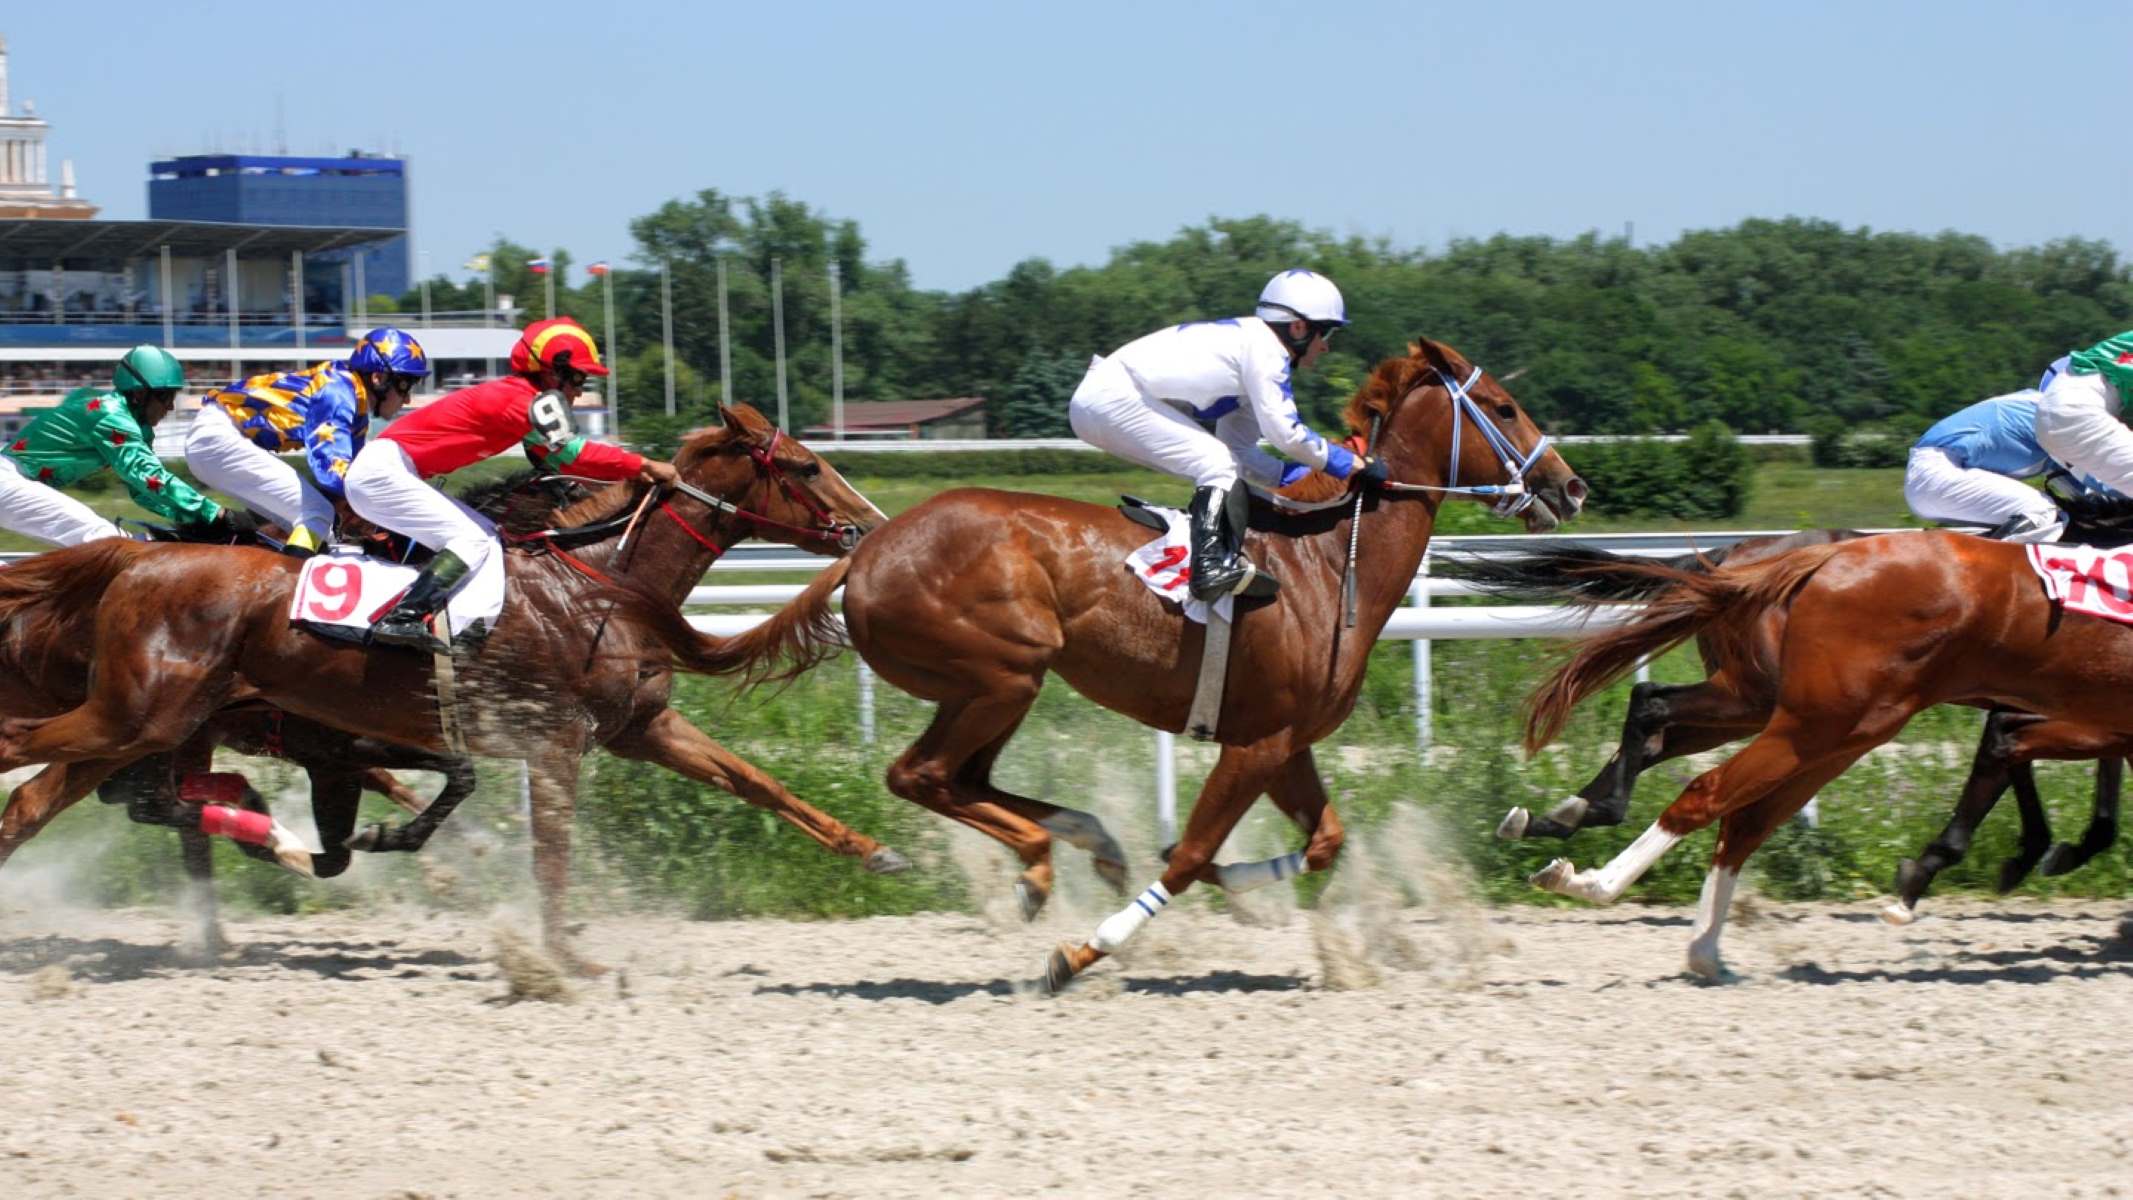 How To Watch Live Horse Racing Online